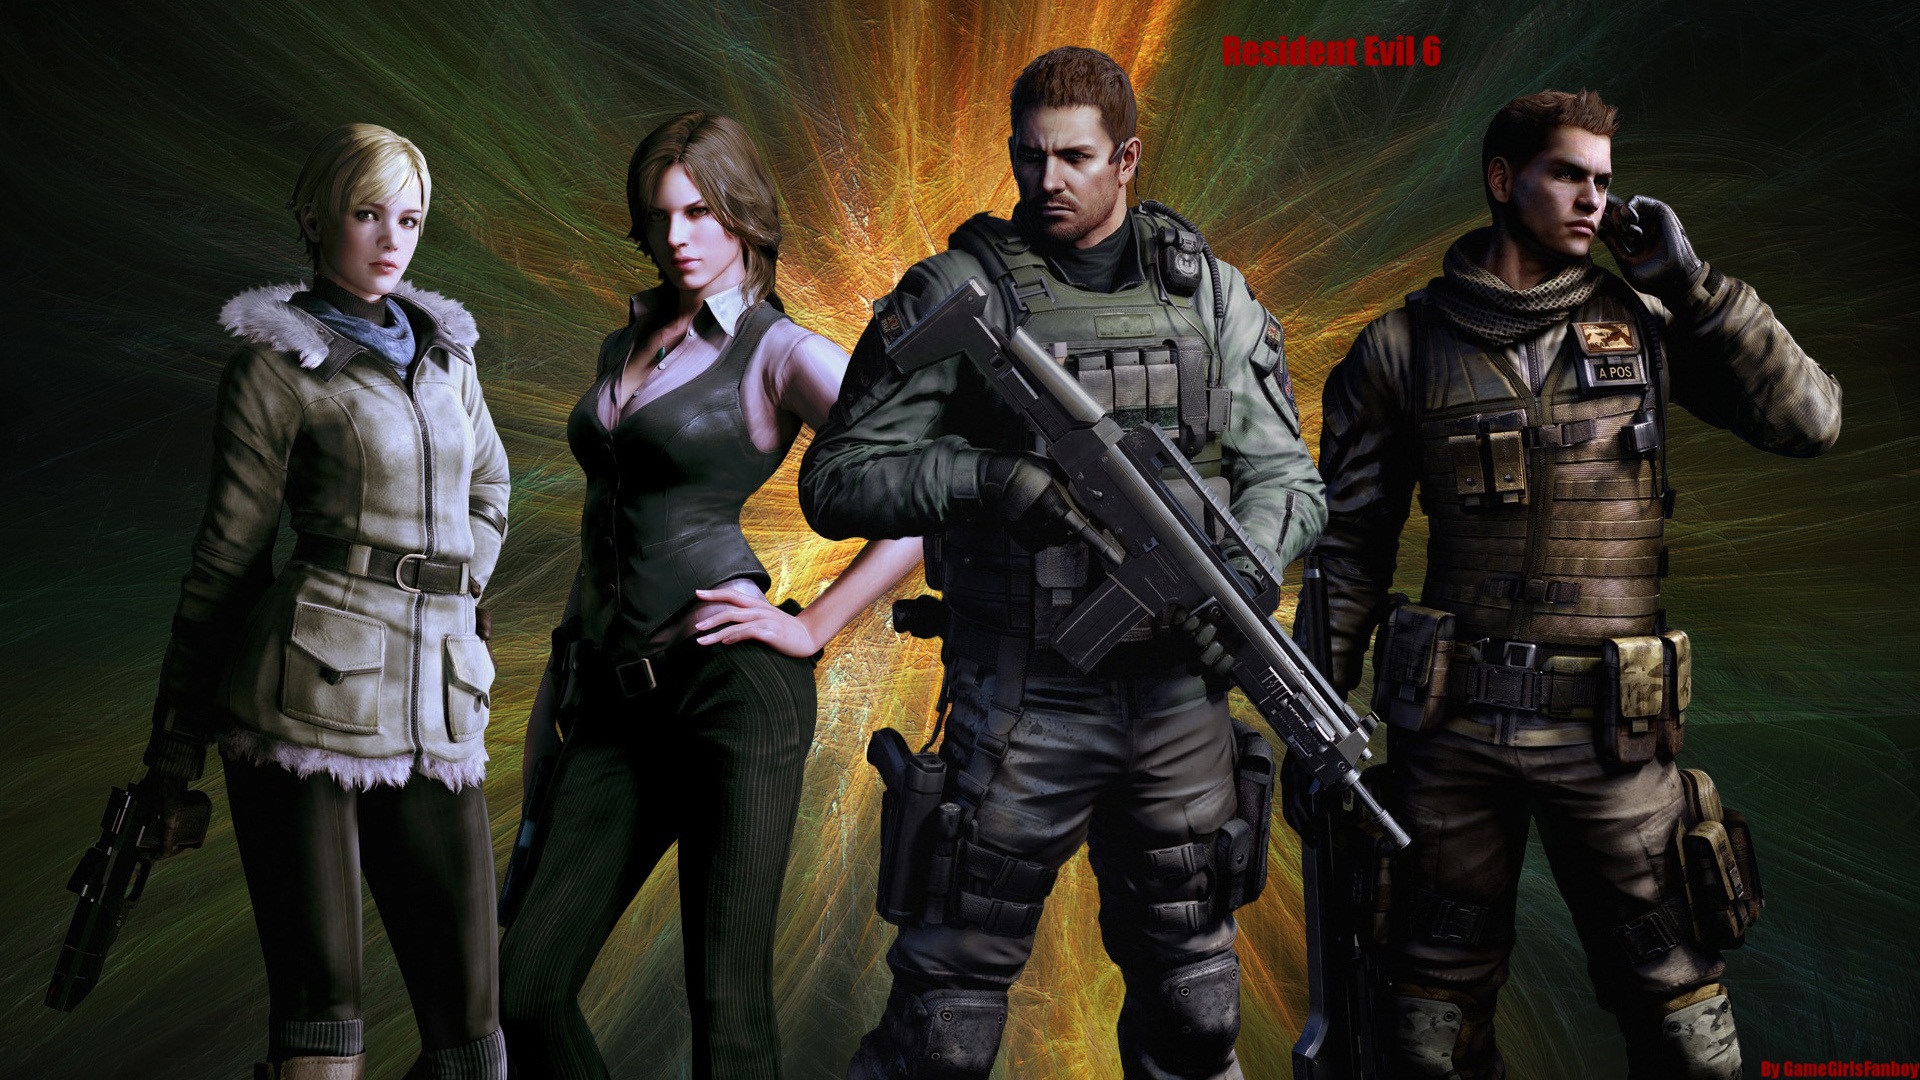 Resident Evil 6 HD game wallpapers #4 - 1920x1080